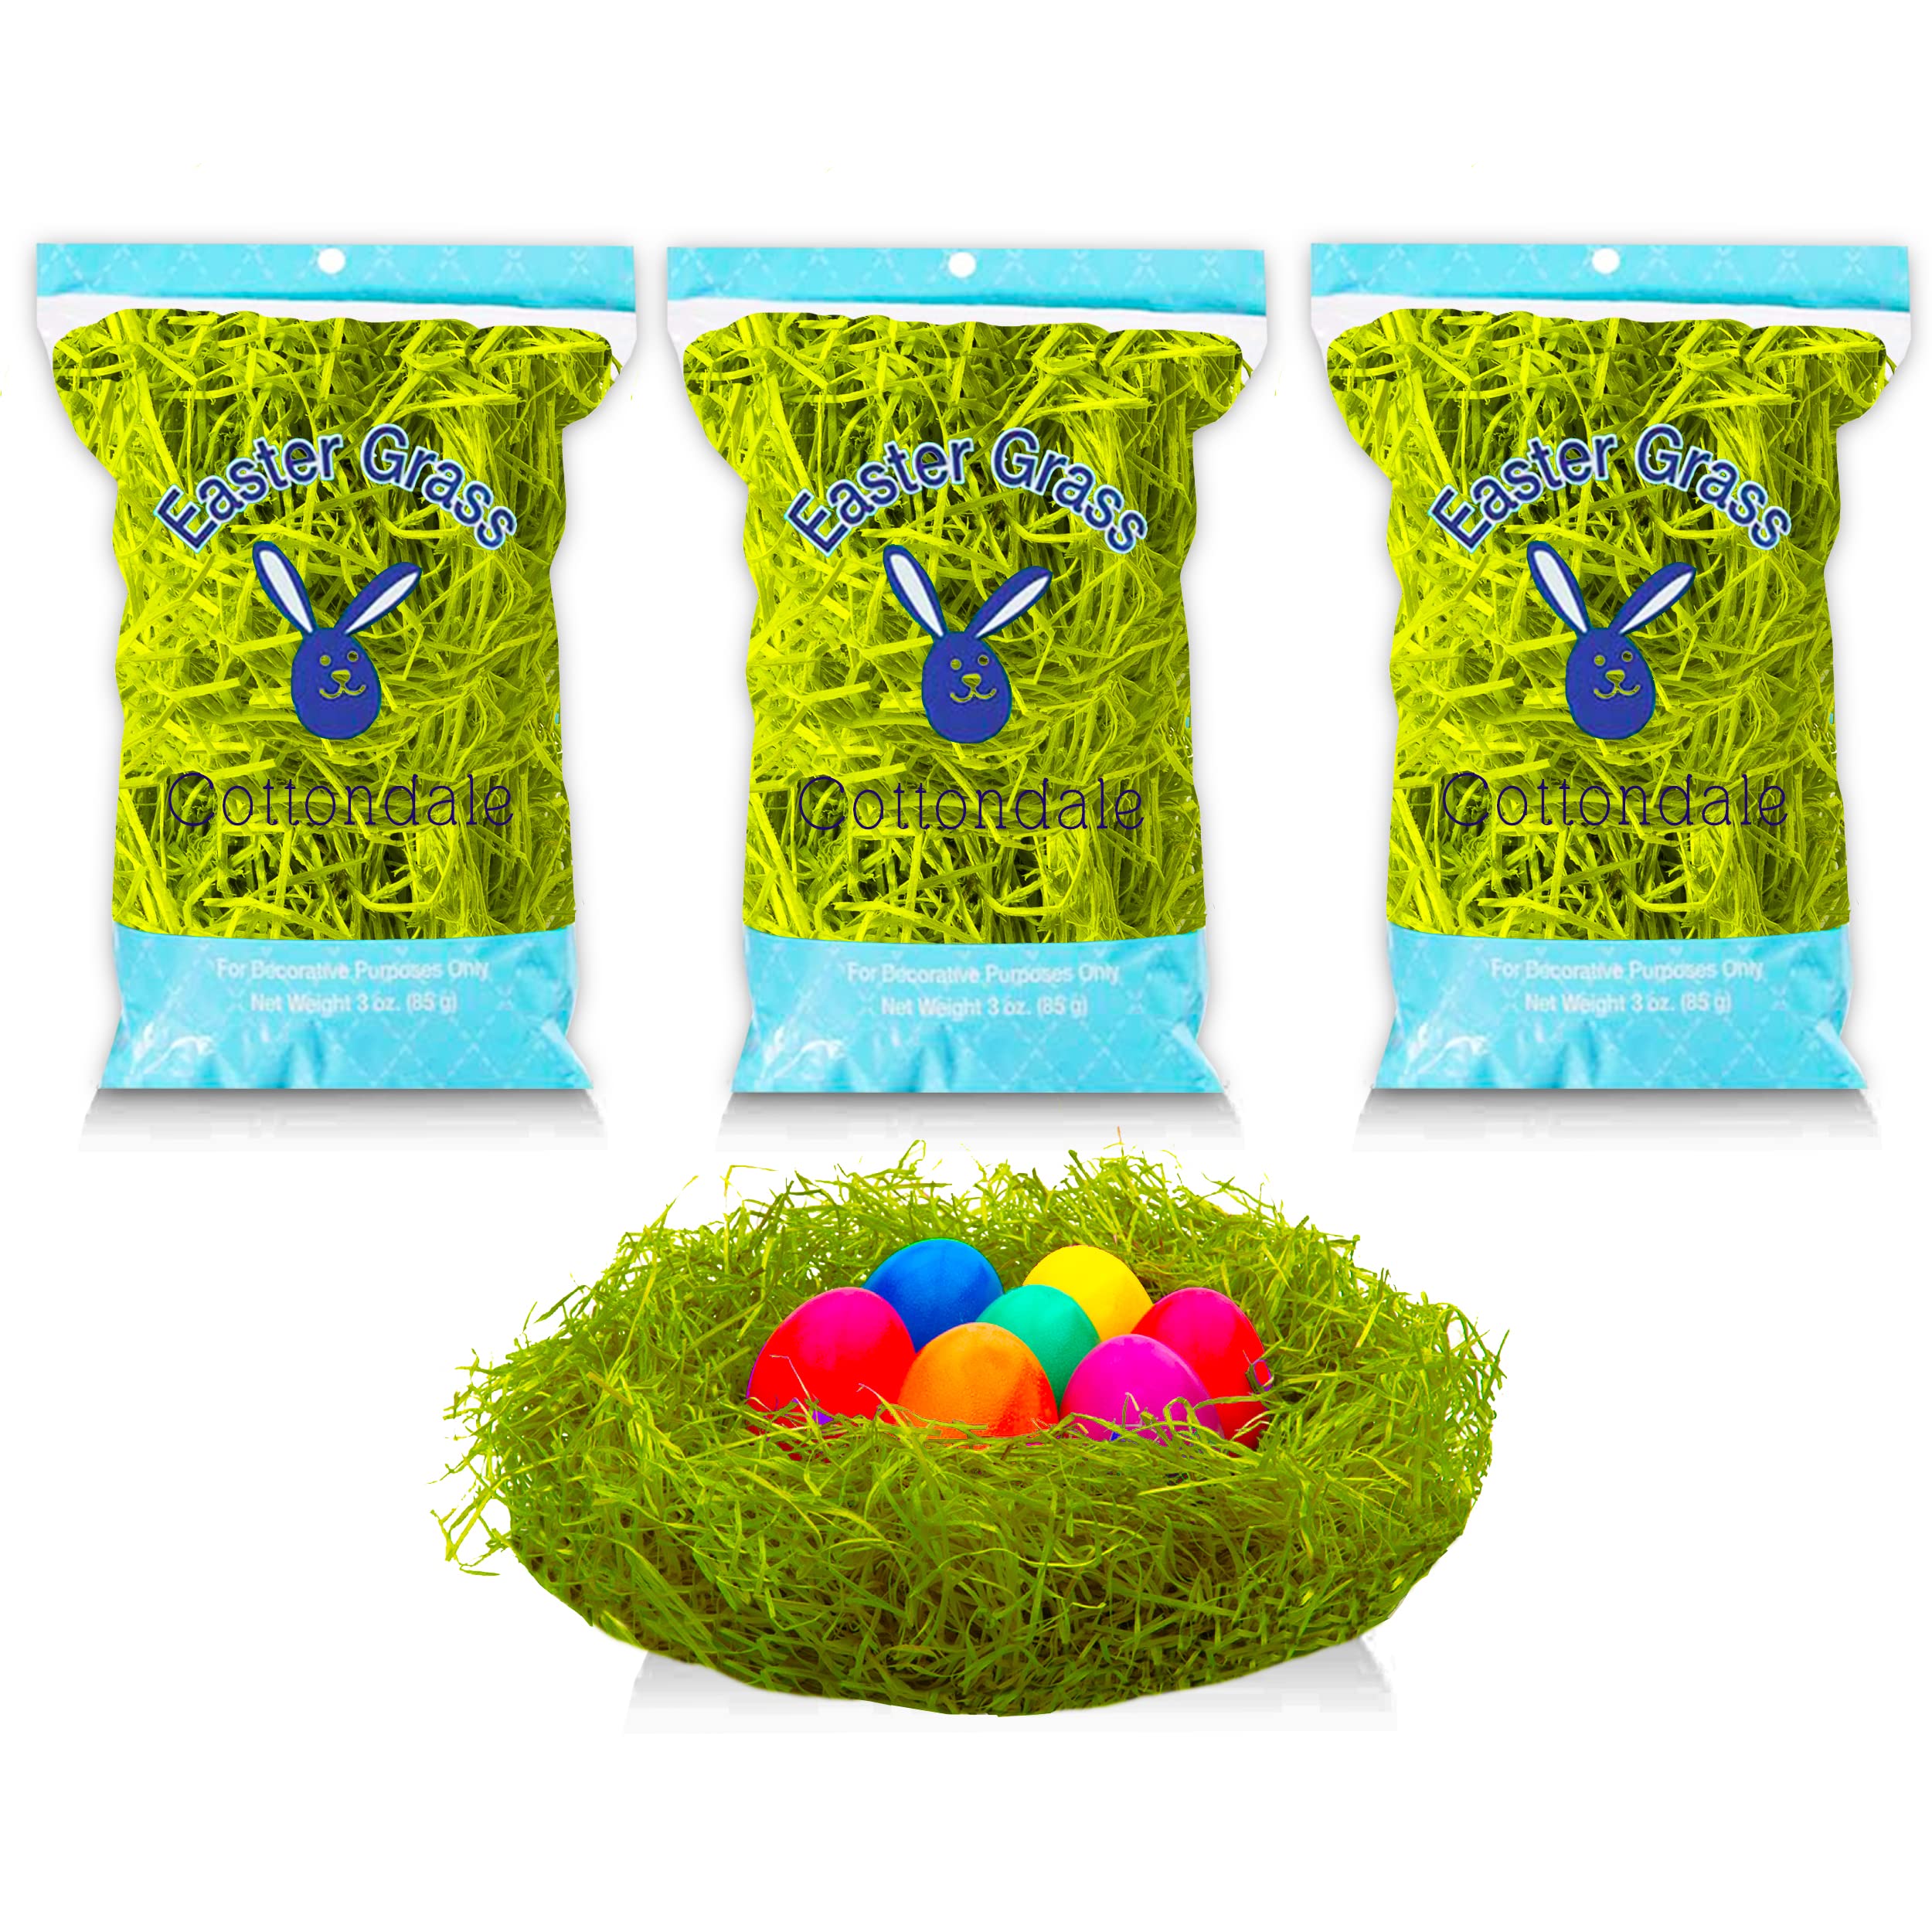 Green Raffia Grass Bundle for Easter Arts and Crafts Easter Eggs